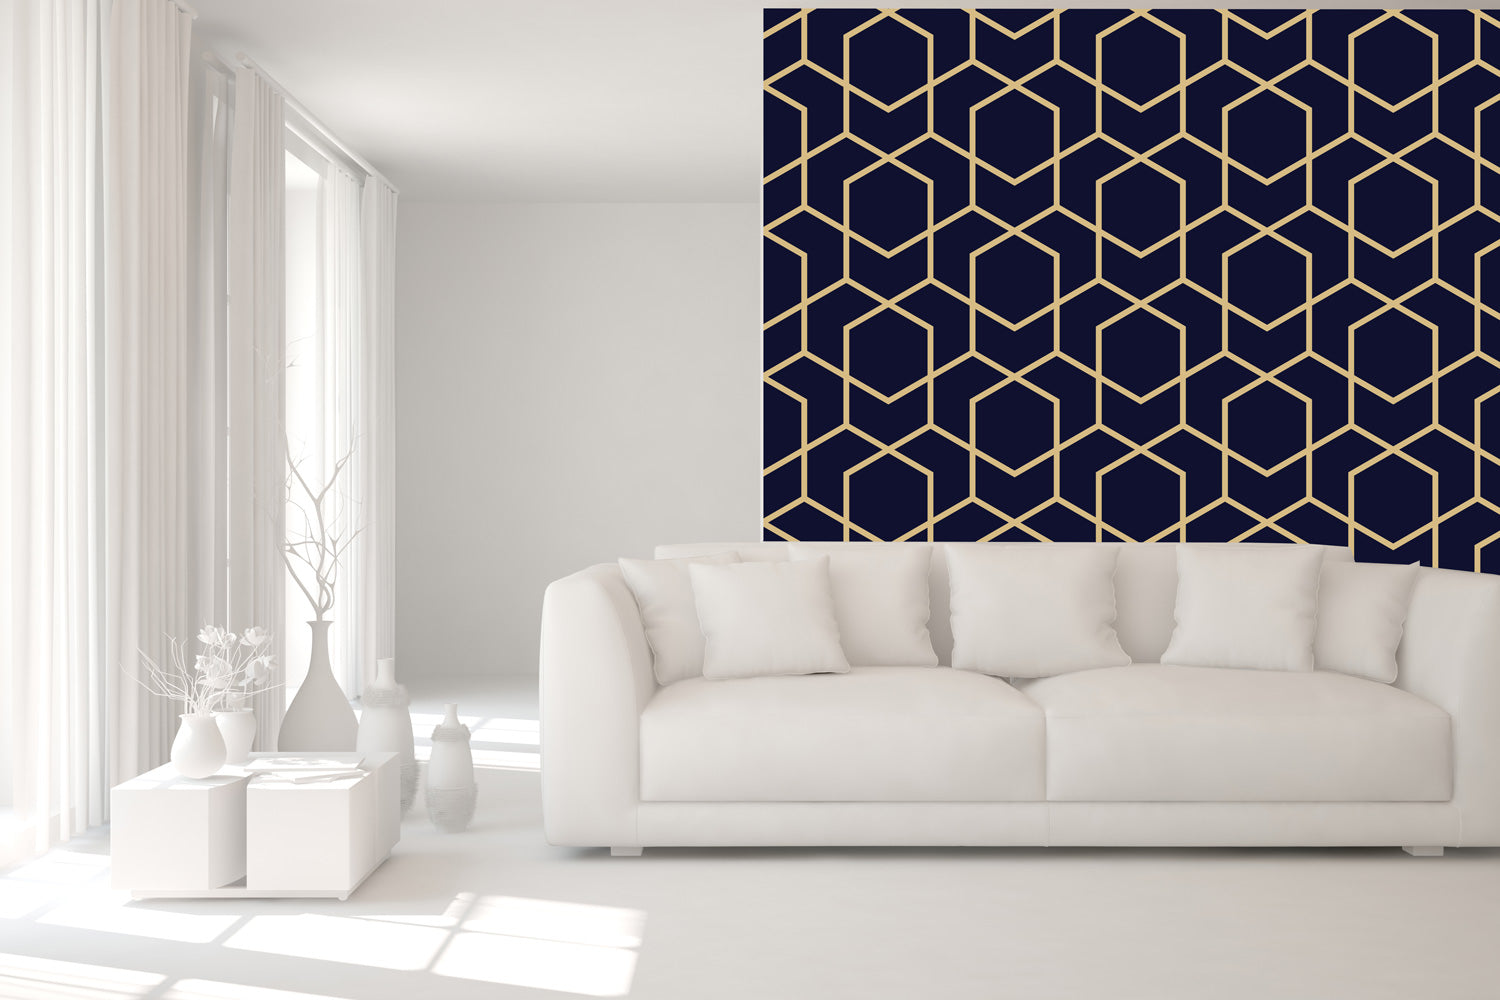 Blue and Gold Geometric